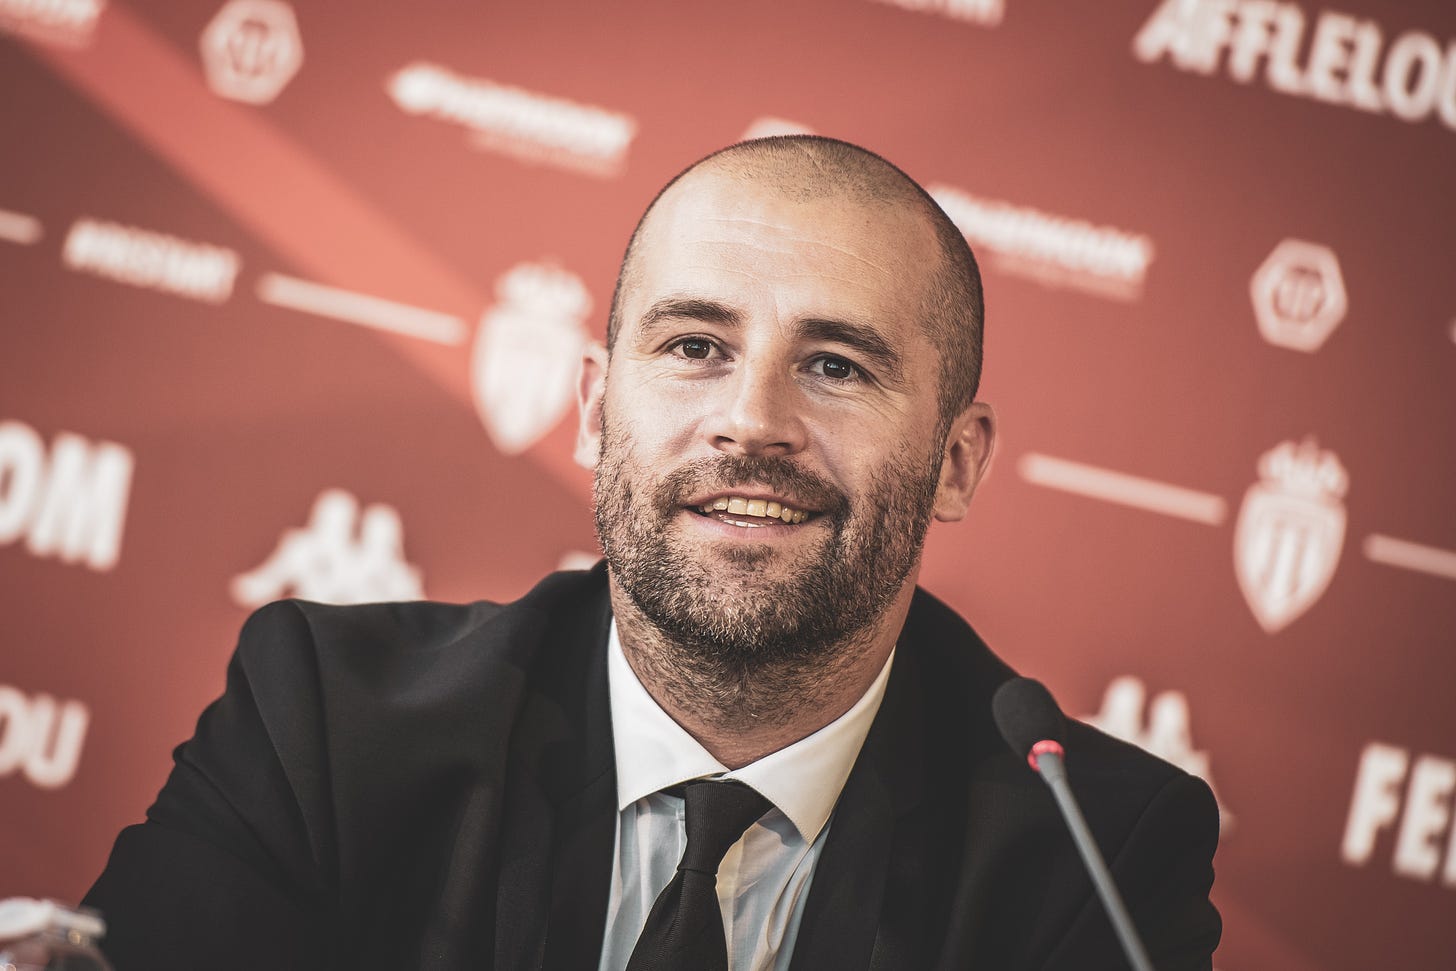 Paul Mitchell: "Create a good foundation together" - AS Monaco